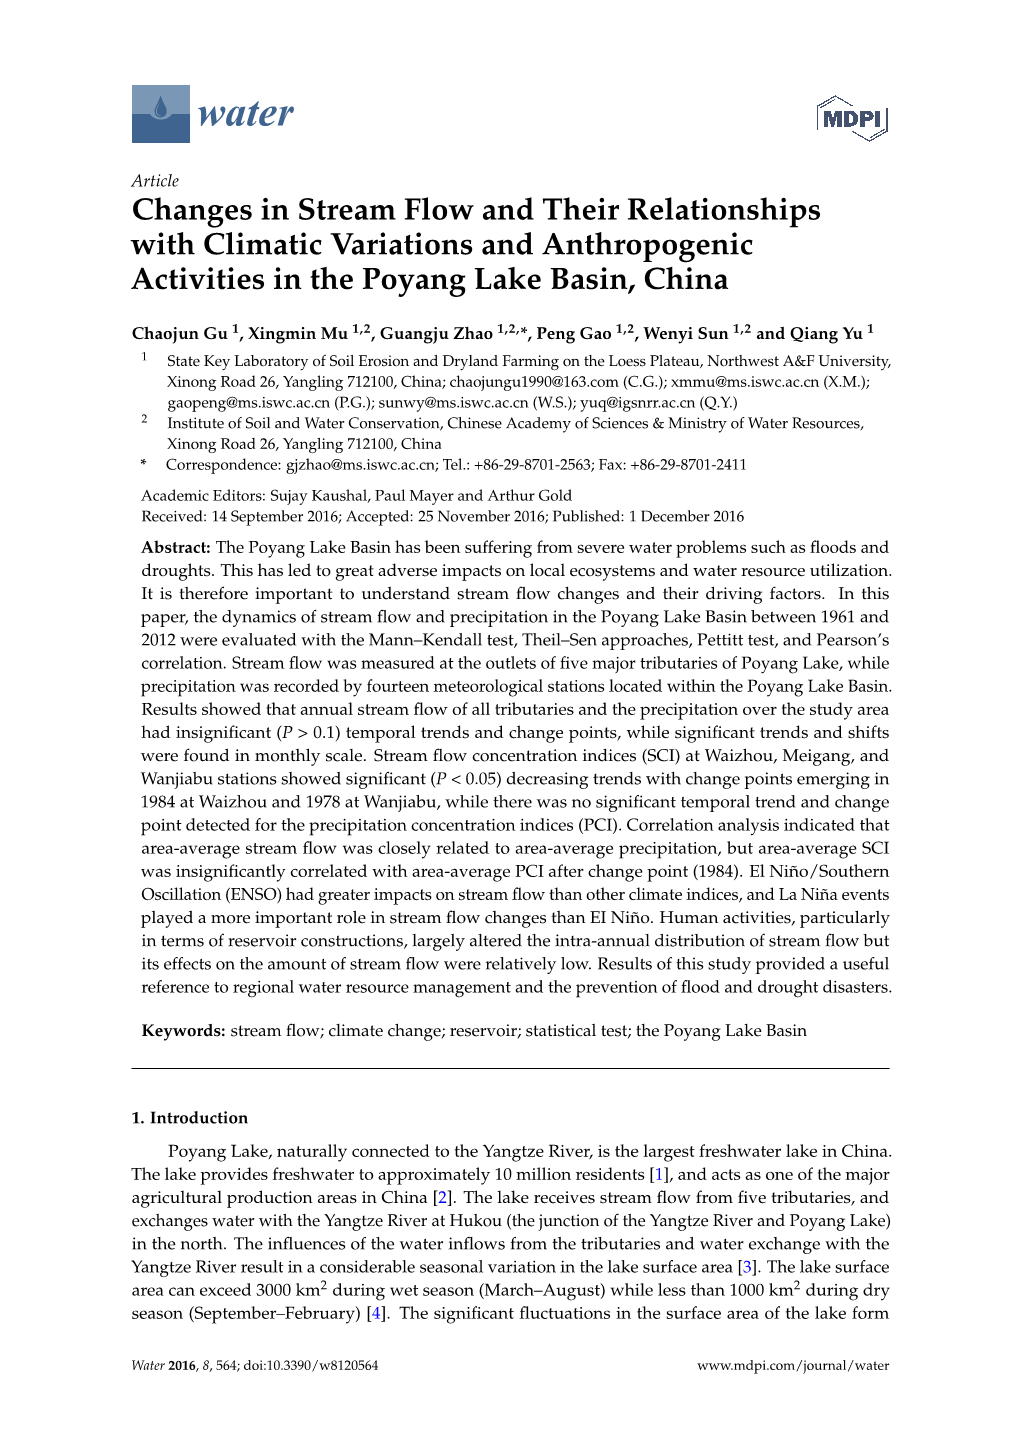 Changes in Stream Flow and Their Relationships with Climatic Variations and Anthropogenic Activities in the Poyang Lake Basin, China